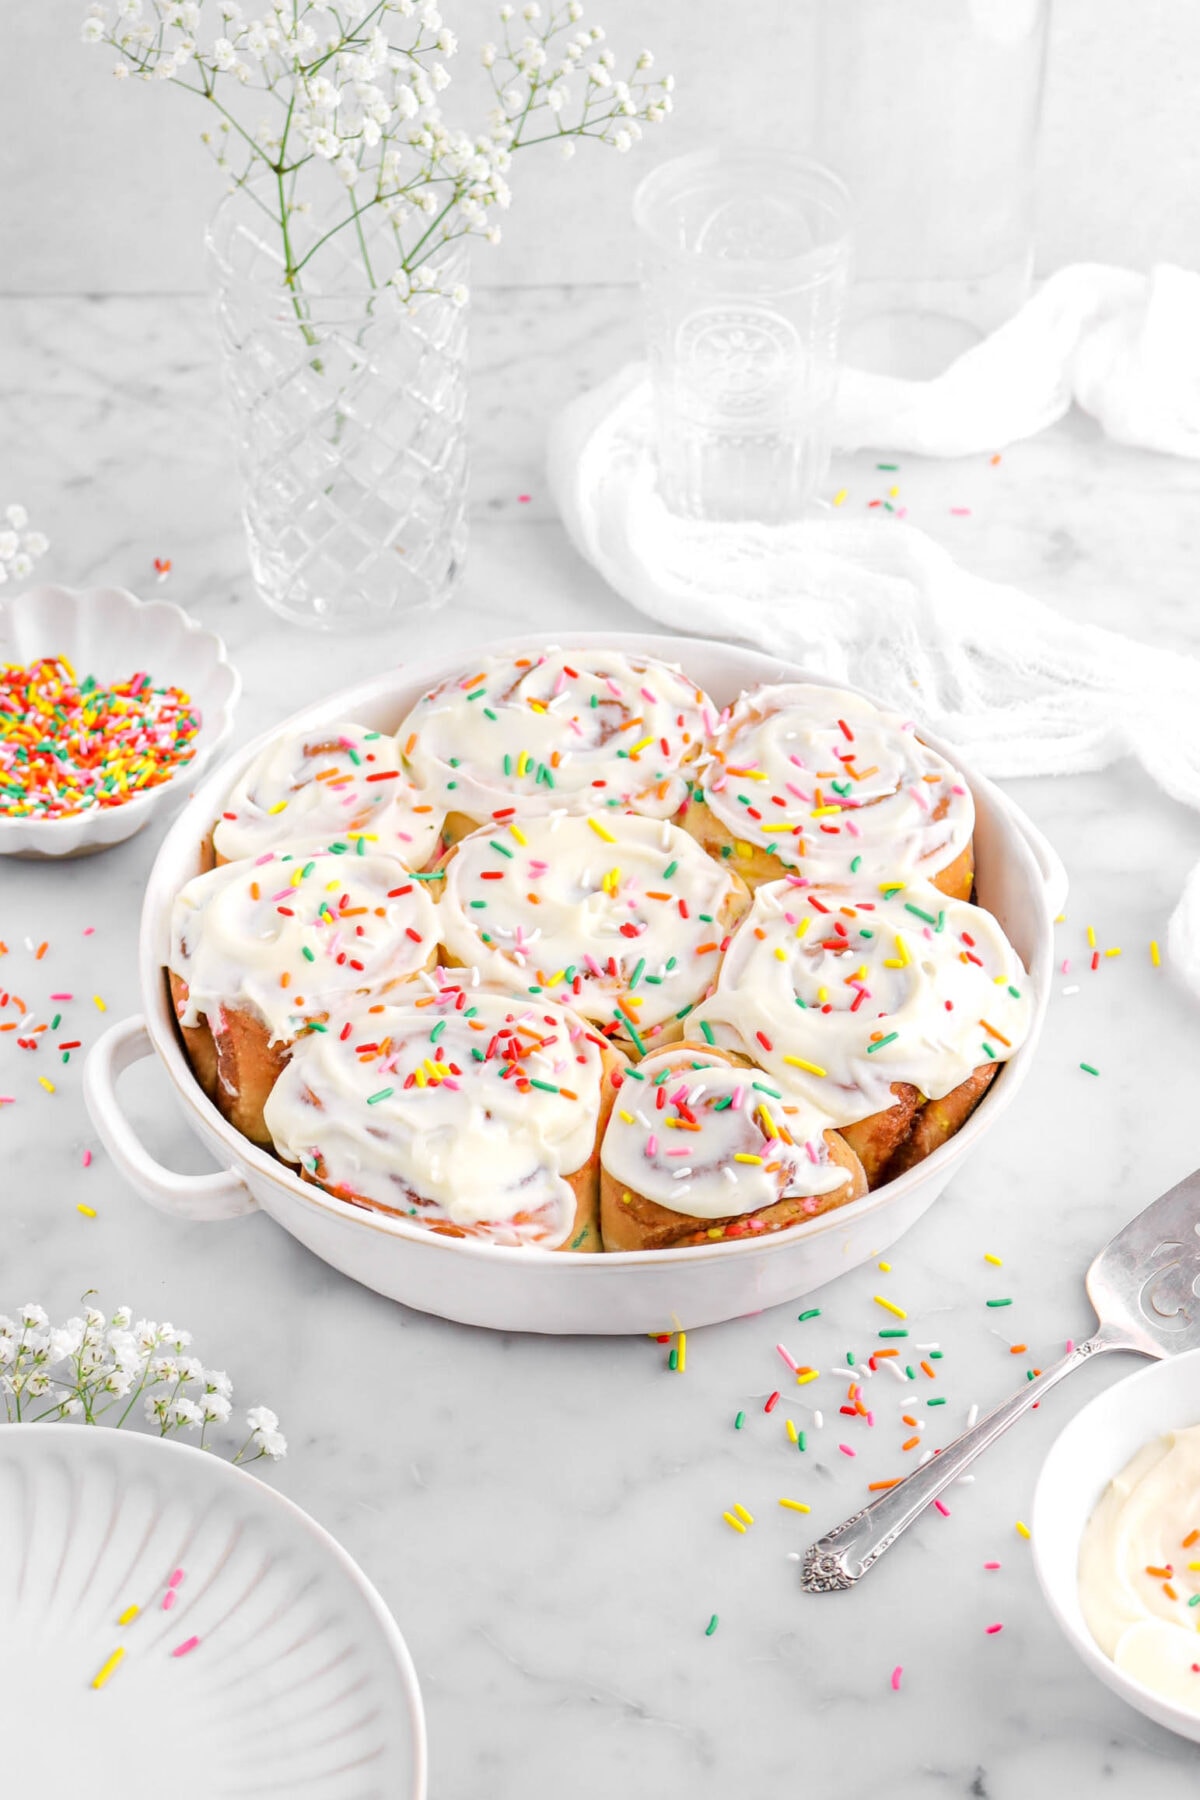 angled image of eight cinnamon rolls in round white cassserole with frosting and sprinkles on top, with sprinkles around, a cake knife beside with bowl of frosting and bowl of sprinkles, a white cheese cloth, a white plate, with white flowers around on marble surface.